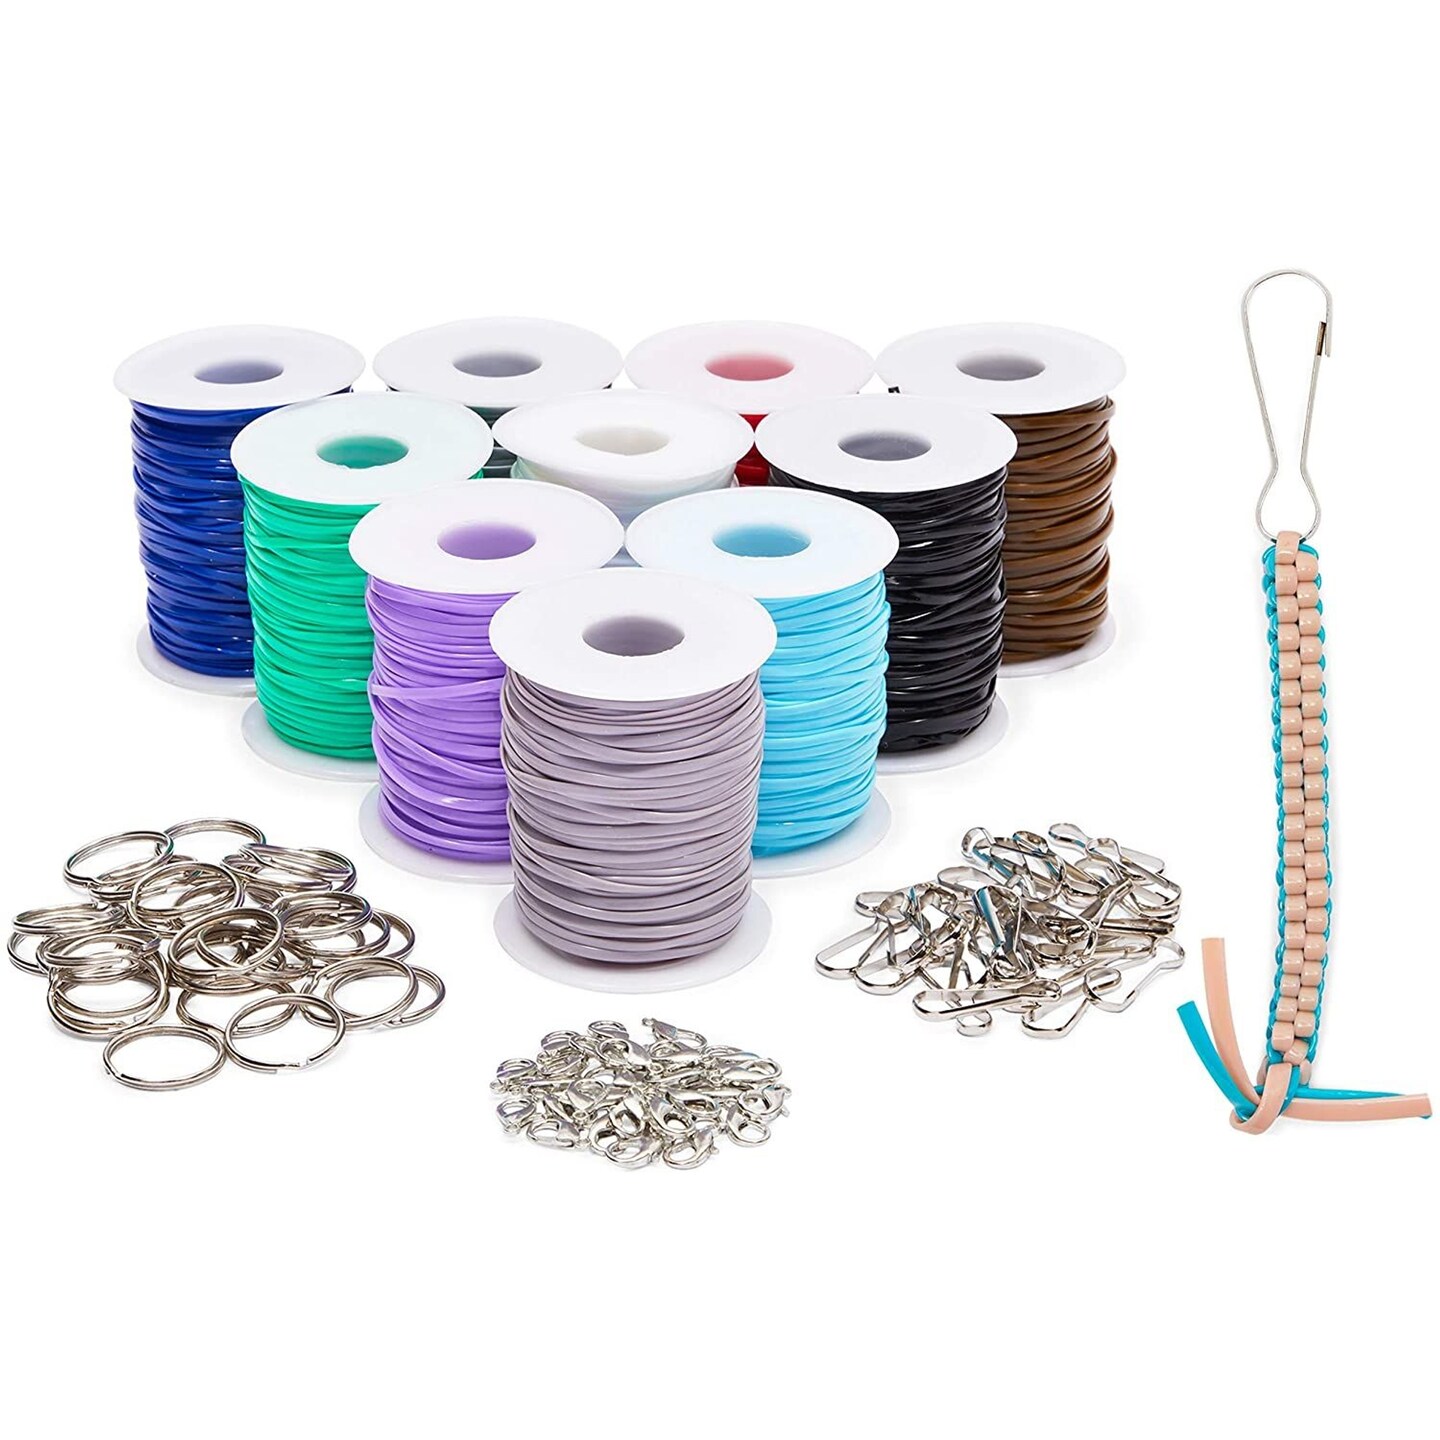 Lanyard Kit, Plastic String for Bracelets, Necklaces, with